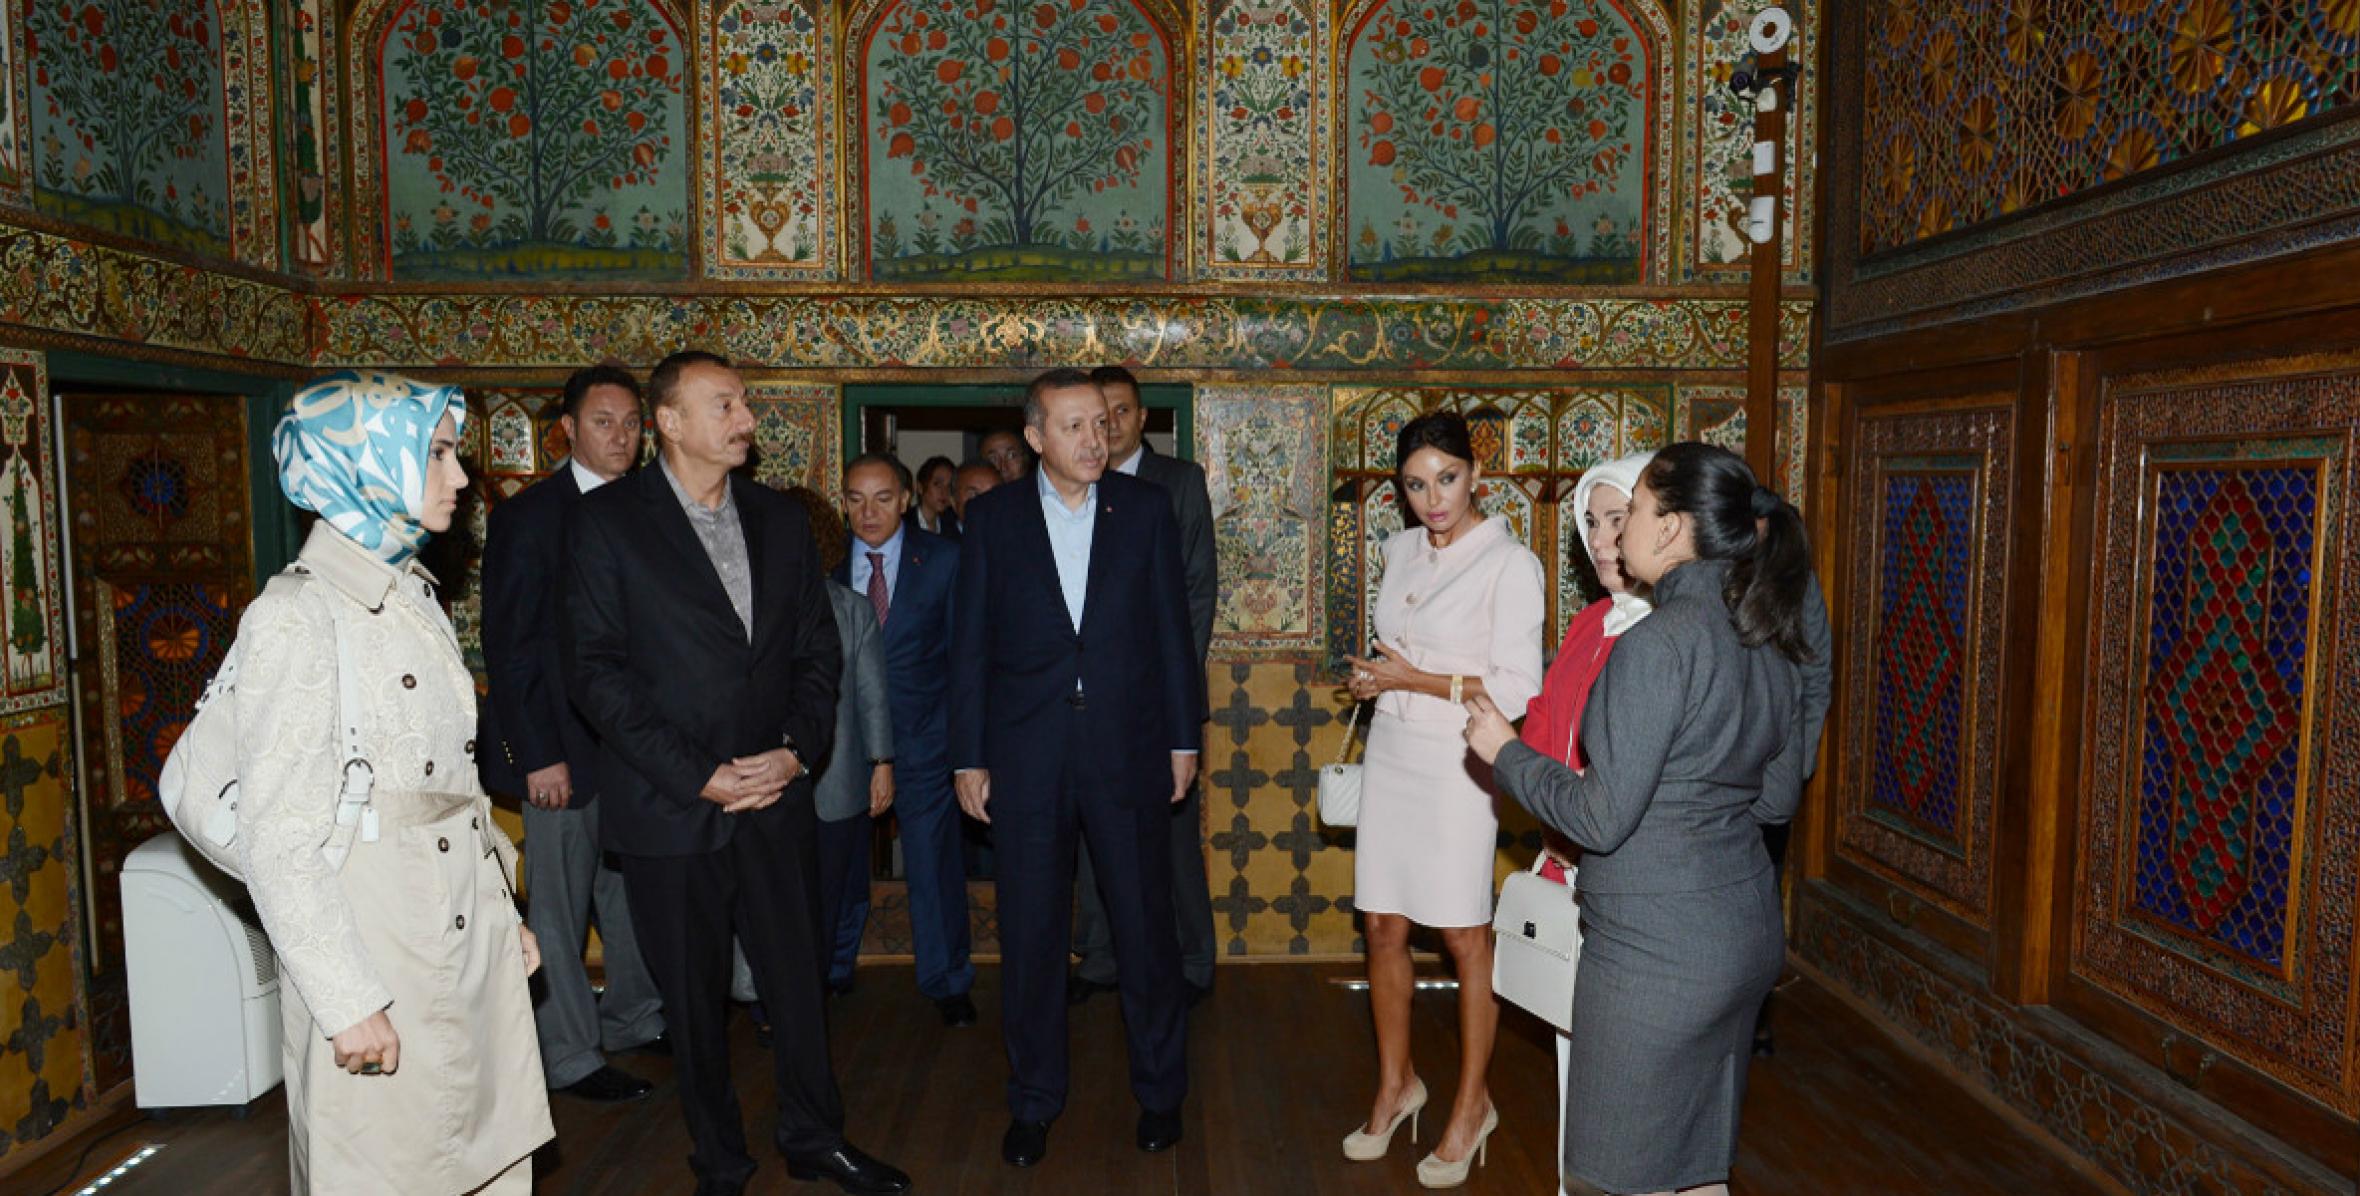 Ilham Aliyev and Prime Minister Recep Tayyip Erdogan visited the Palace of Shaki Khans